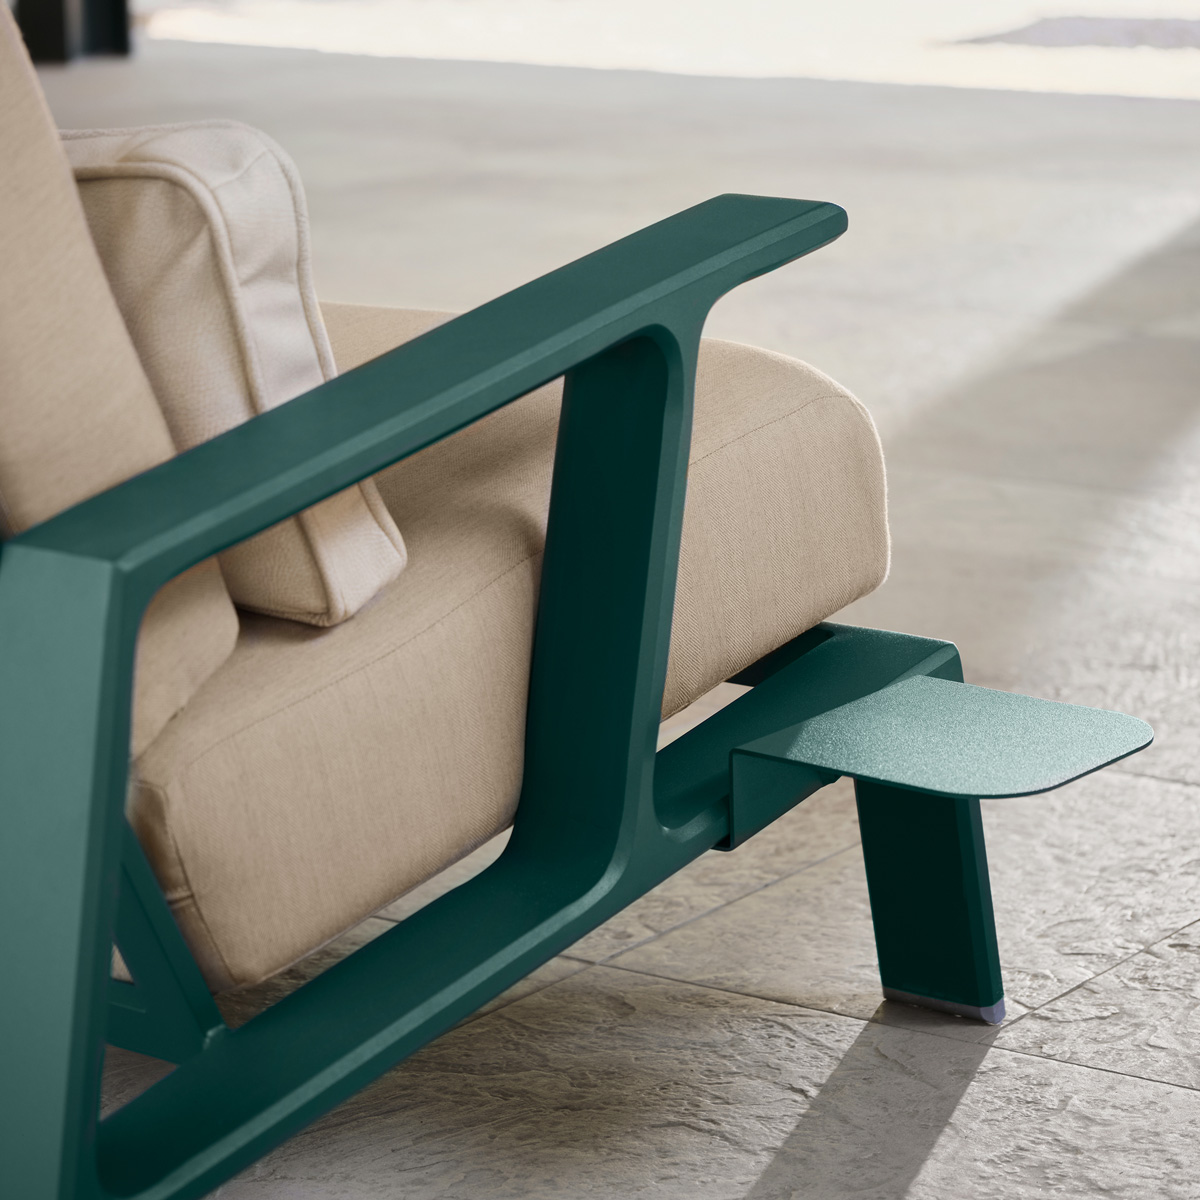 Detail of the Elevation modern Adirondack lounge chair by Woodard with green finish and beige fabric cushions.